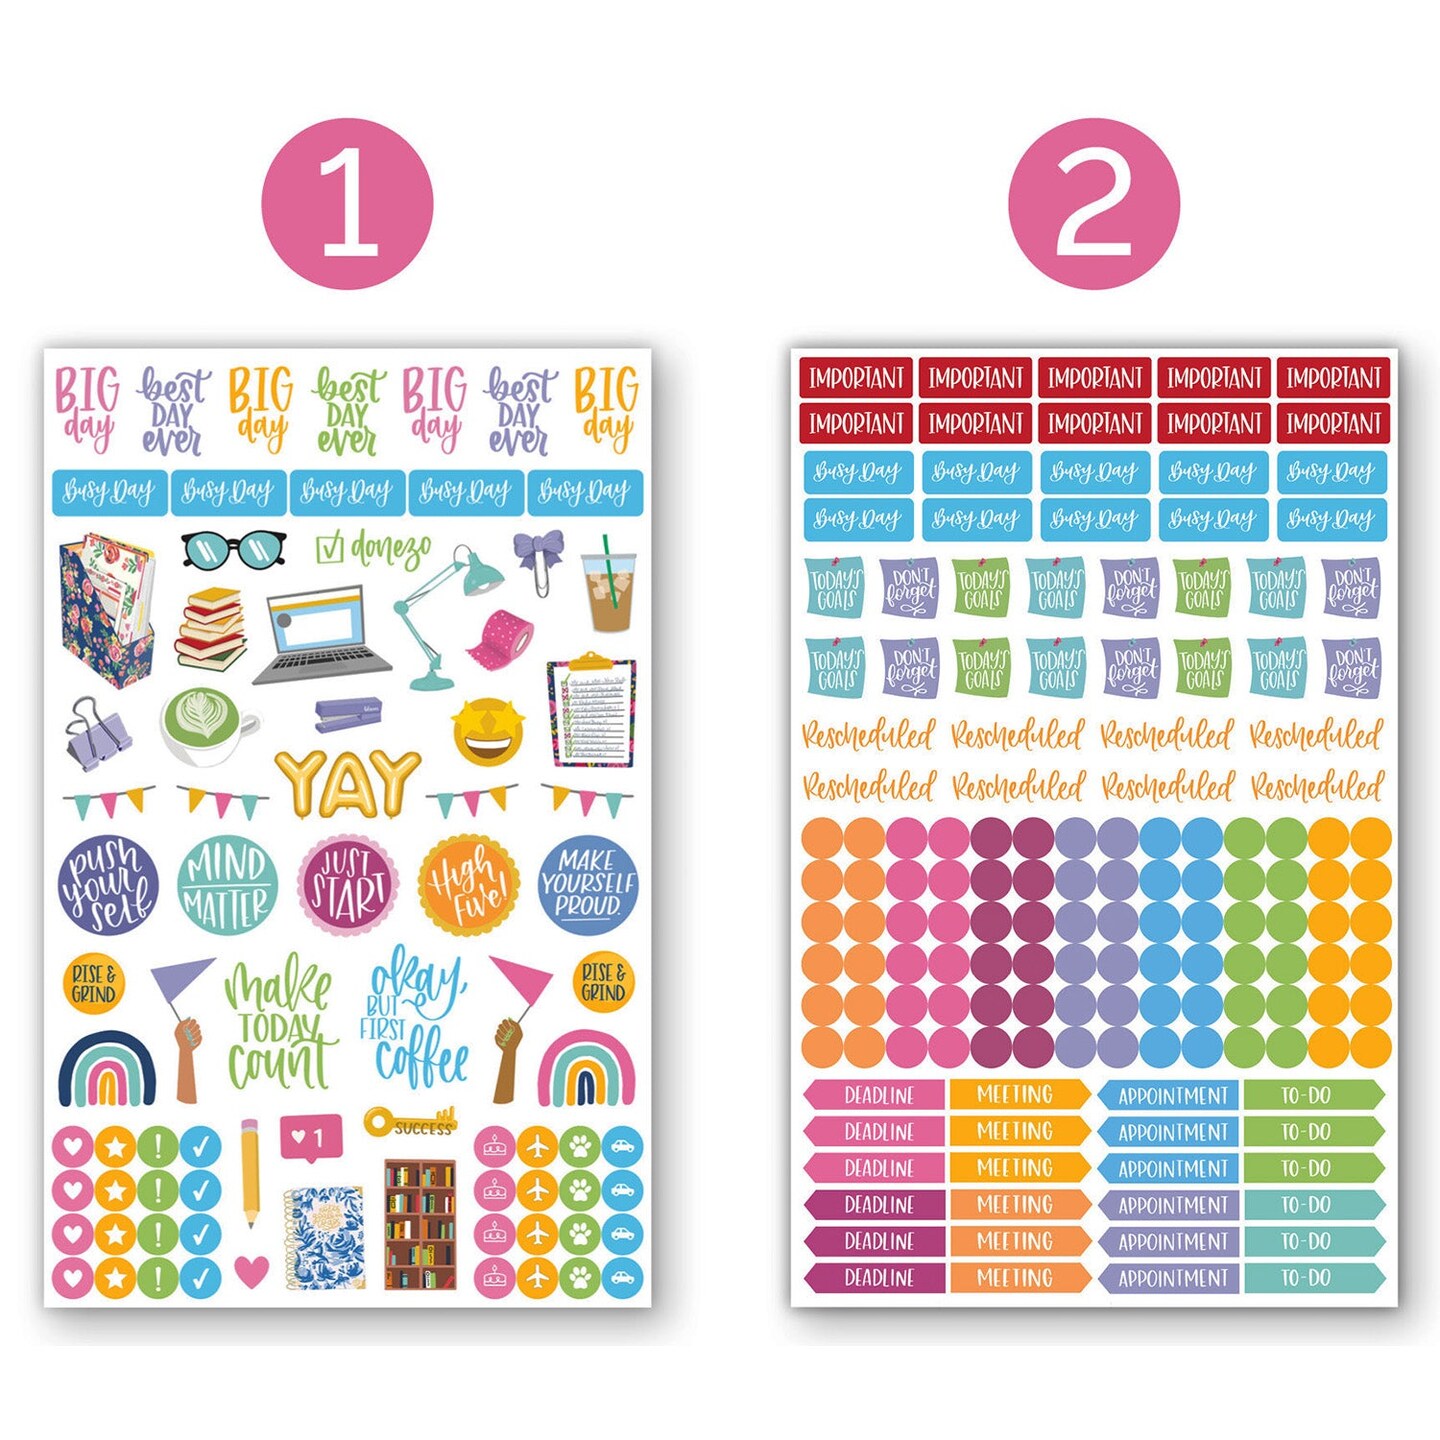 bloom daily planners Sticker Sheets, Classic Planner Stickers V3